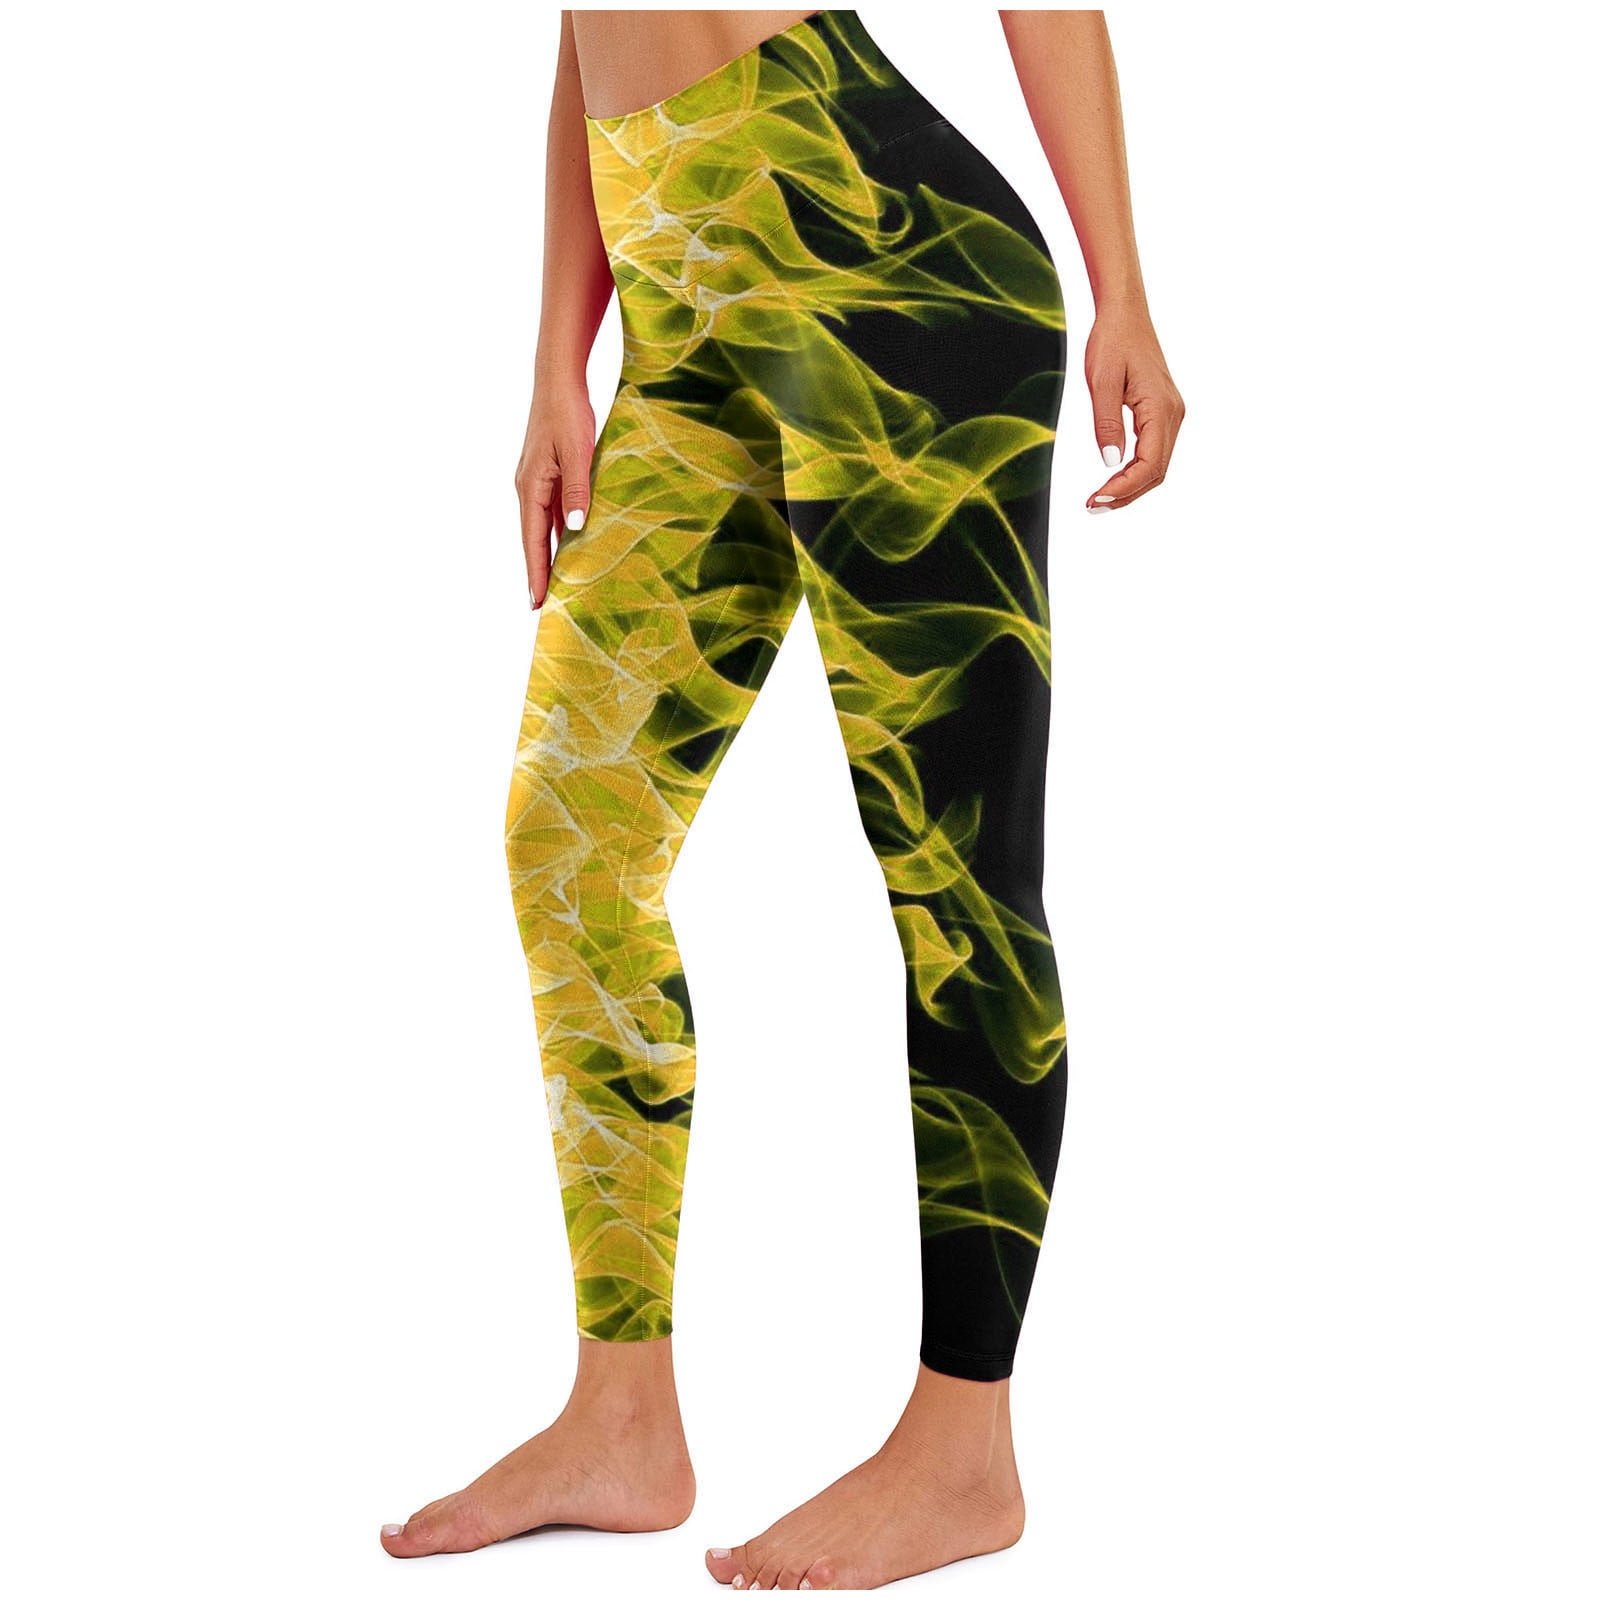 REORIAFEE Camo Leggings for Women High Waisted Scrunch Butt Athletic Leggings  Green Flame Printed Yoga Pants Soft Opaque Slim Exercise Pants for Running  Workout Elastic Tights Green 3XL 